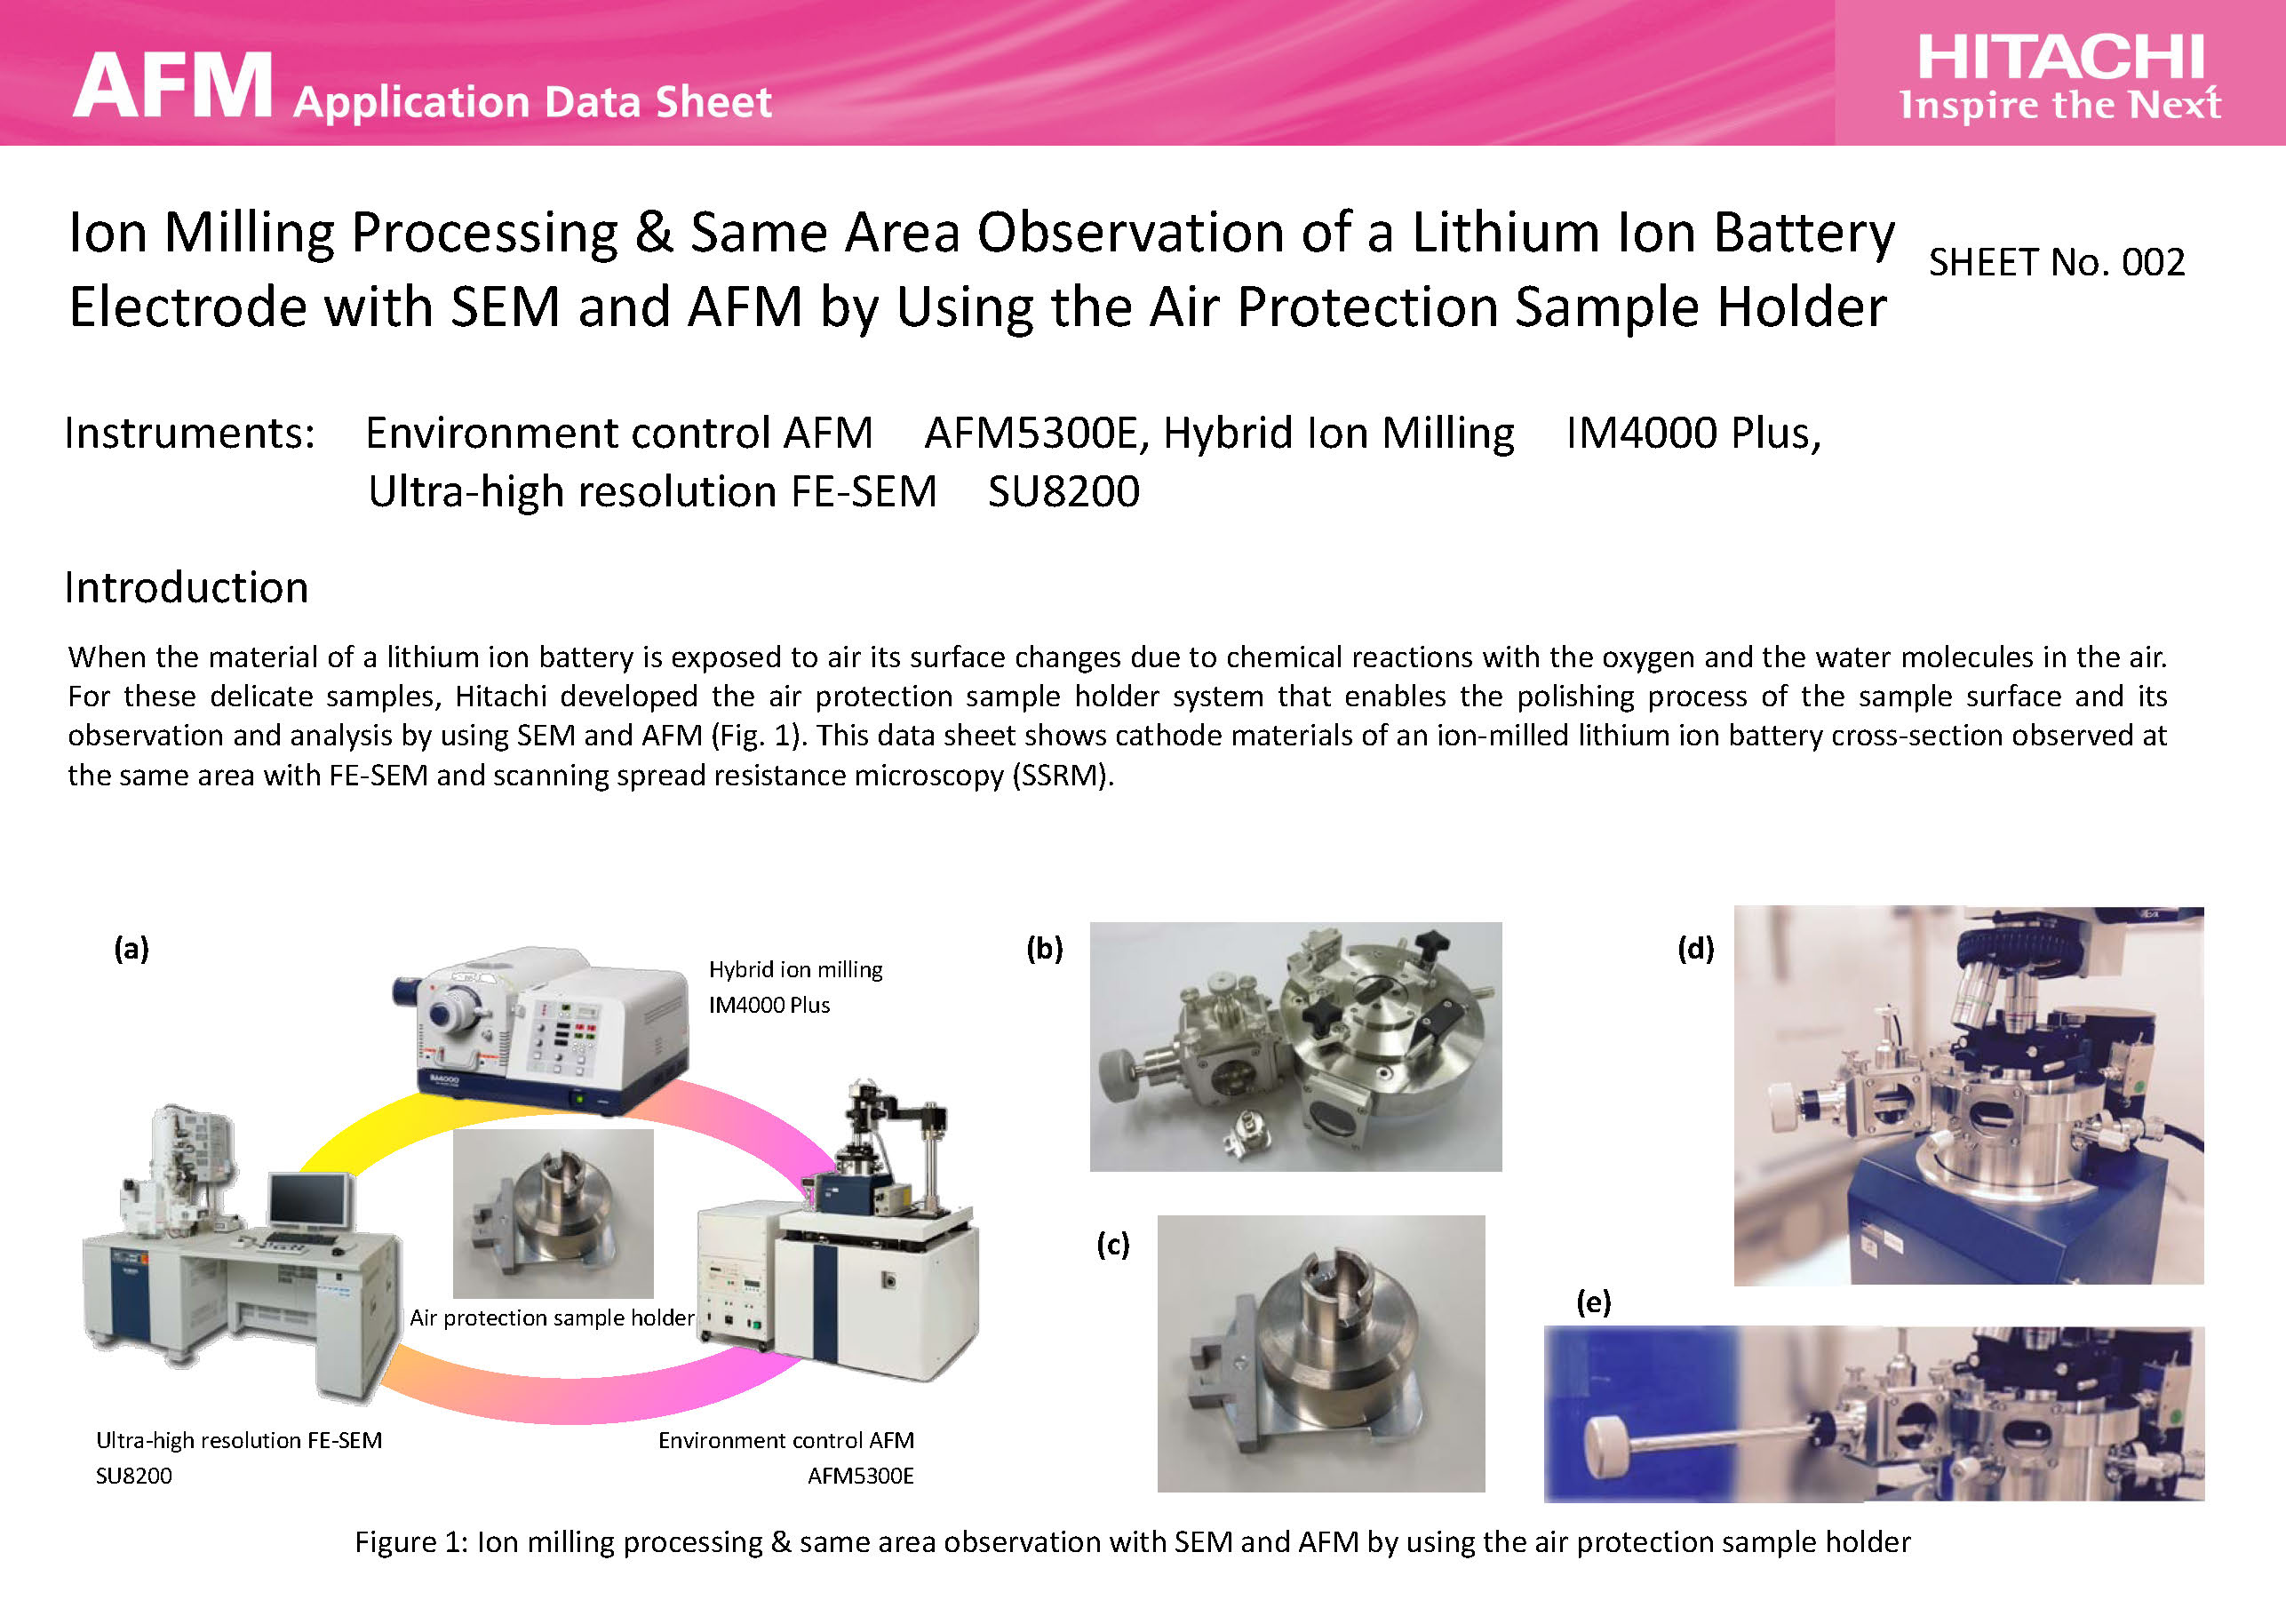 Ion Milling Processing & Same Area Observation of a Lithium Ion Battery Electrode with SEM and AFM by Using the Air Protection Sample Holder